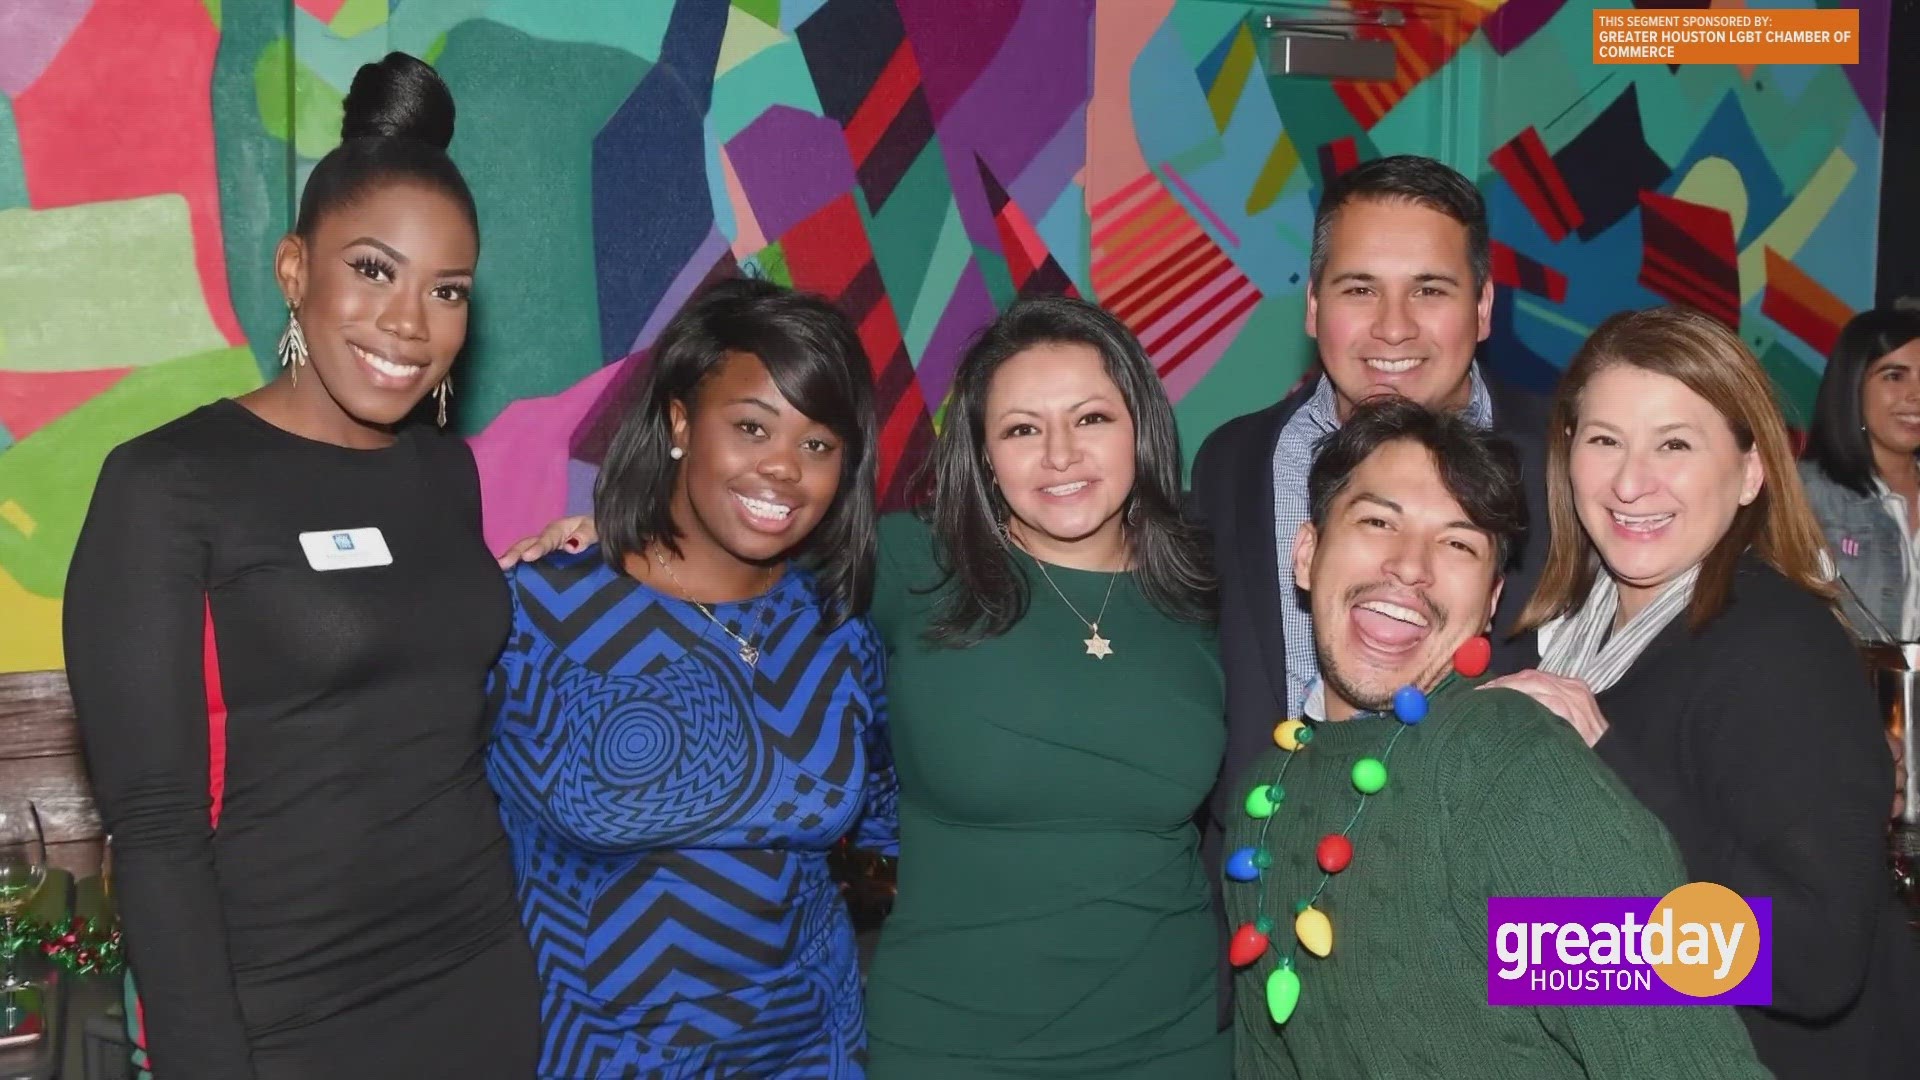 The Greater Houston LGBT Chamber of Commerce is a space for businesses and their allies to foster economic empowerment and inclusion throughout the community.